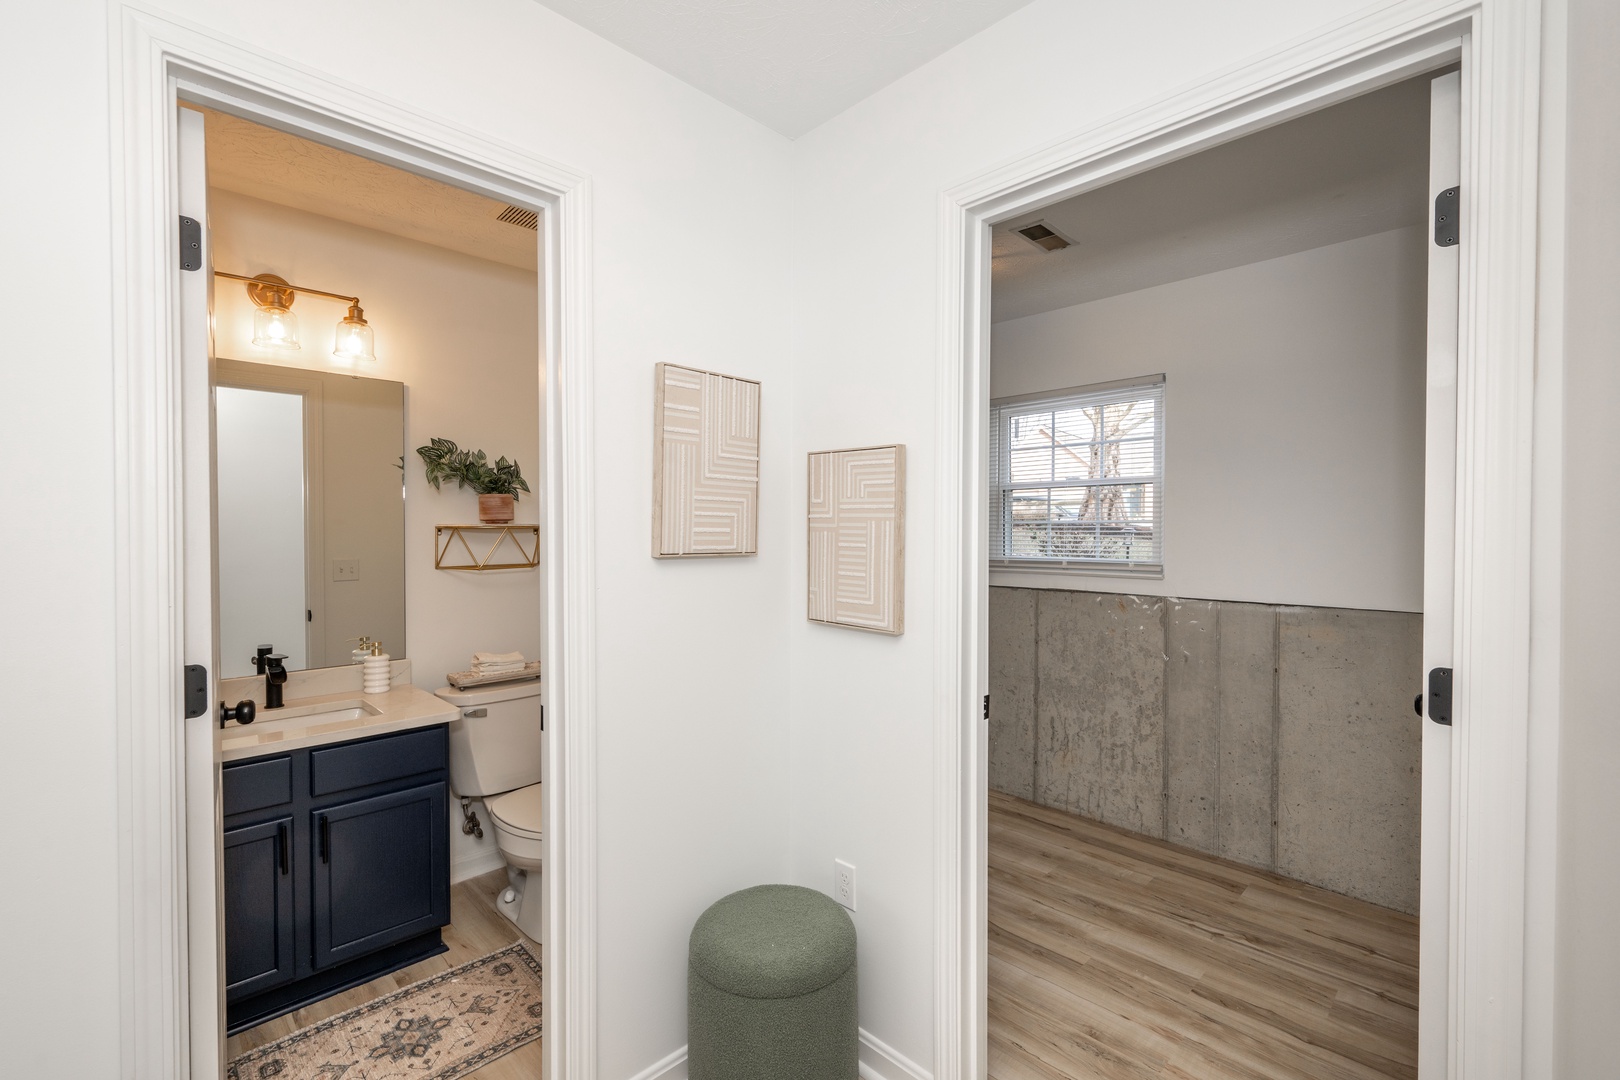 A convenient half bath & private laundry await on the lower level